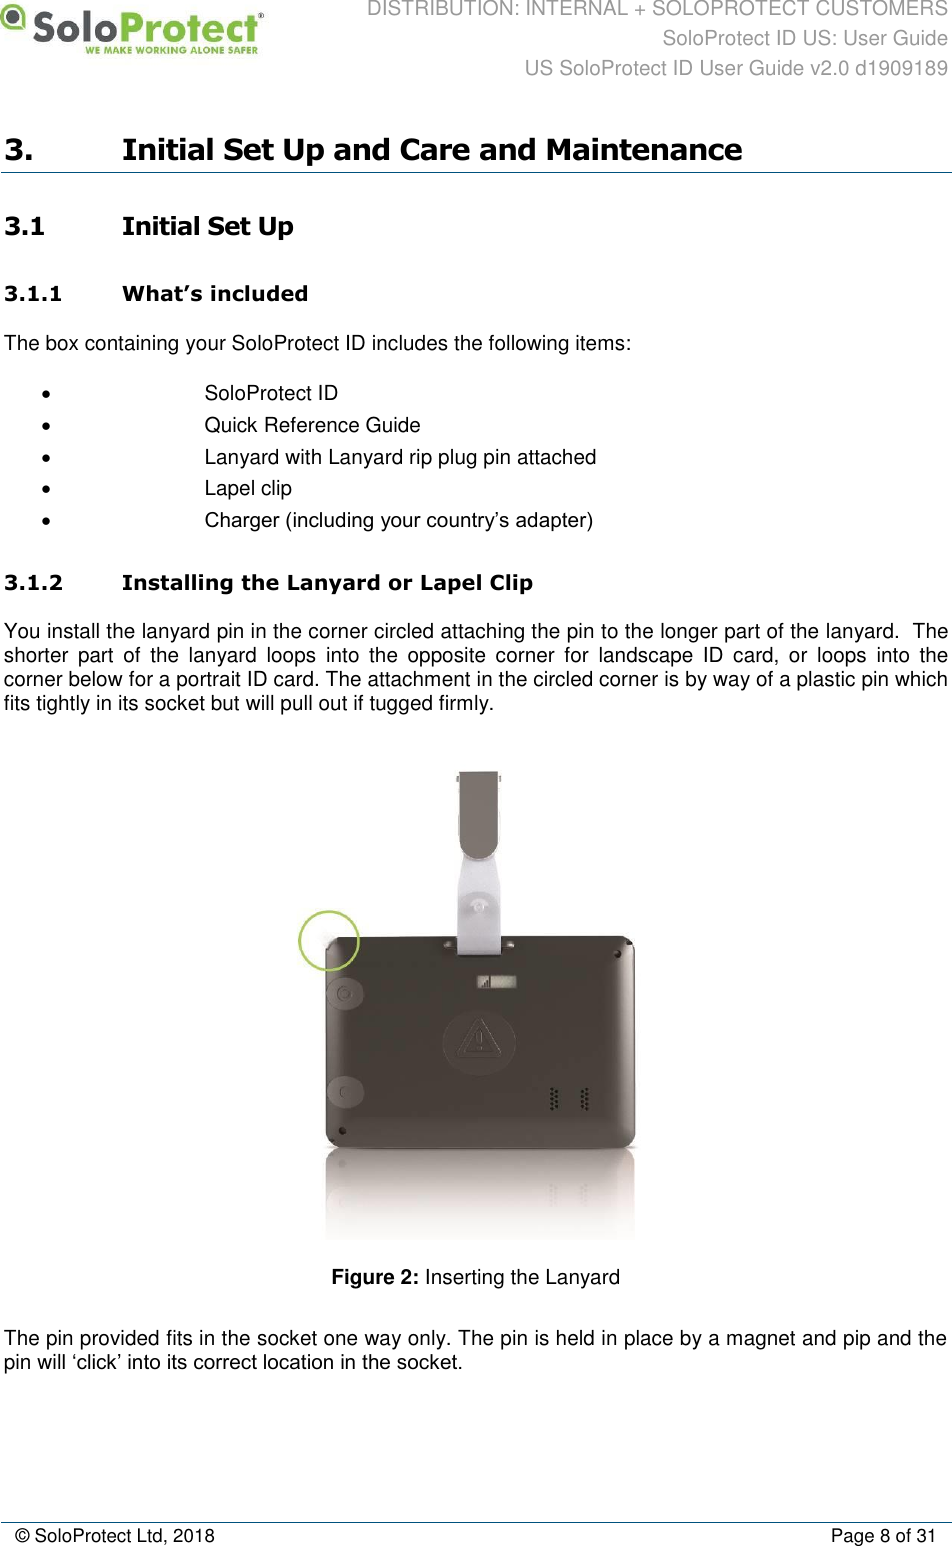 DISTRIBUTION: INTERNAL + SOLOPROTECT CUSTOMERS SoloProtect ID US: User Guide US SoloProtect ID User Guide v2.0 d1909189  © SoloProtect Ltd, 2018  Page 8 of 31 3. Initial Set Up and Care and Maintenance 3.1 Initial Set Up 3.1.1 What’s included The box containing your SoloProtect ID includes the following items: •  SoloProtect ID •  Quick Reference Guide •  Lanyard with Lanyard rip plug pin attached •  Lapel clip • Charger (including your country’s adapter) 3.1.2 Installing the Lanyard or Lapel Clip You install the lanyard pin in the corner circled attaching the pin to the longer part of the lanyard.  The shorter  part  of  the  lanyard  loops  into  the  opposite  corner  for  landscape  ID  card,  or  loops  into  the corner below for a portrait ID card. The attachment in the circled corner is by way of a plastic pin which fits tightly in its socket but will pull out if tugged firmly.   Figure 2: Inserting the Lanyard The pin provided fits in the socket one way only. The pin is held in place by a magnet and pip and the pin will ‘click’ into its correct location in the socket. 